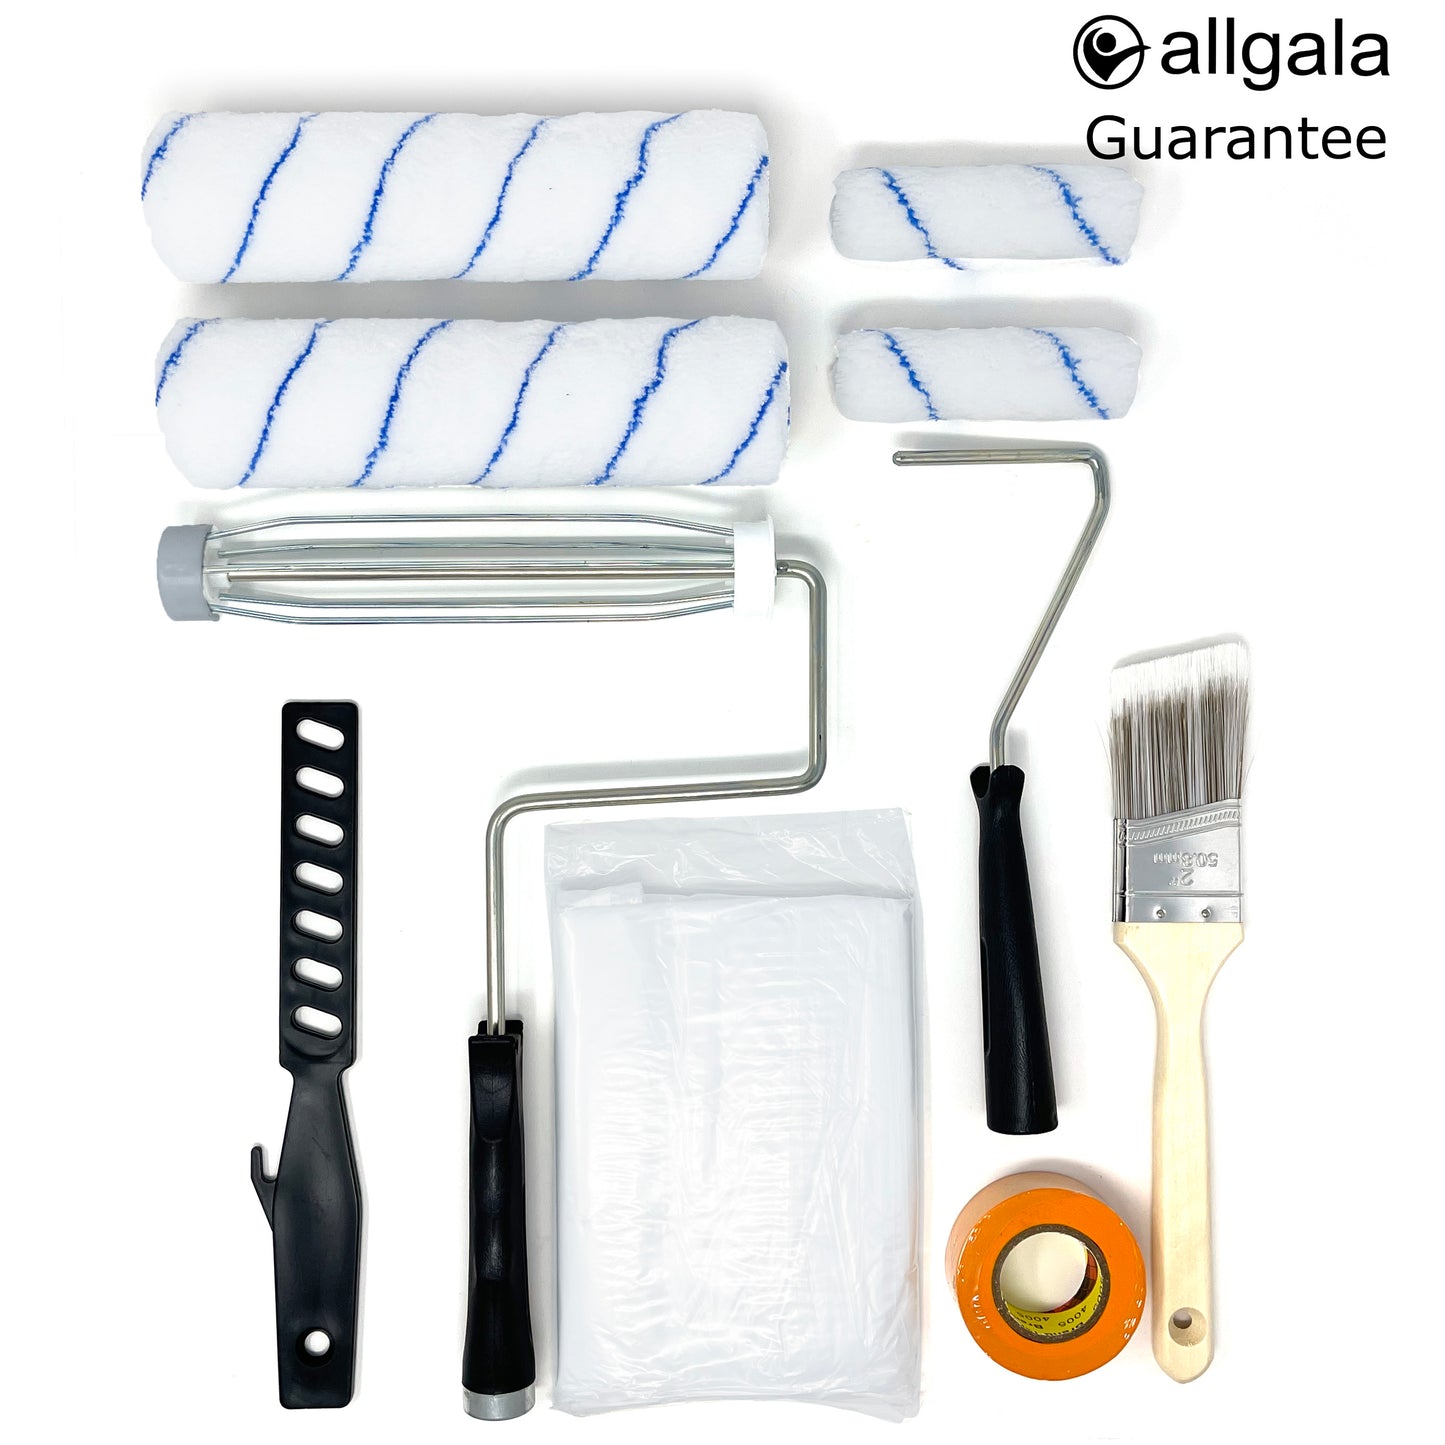 Allgala Paint Kit 12-Piece Premium Painting Roller Kit Set with Roller Frames, Covers, Steel Tray, Brush, Mixer, Masking Tape etc - TH10302